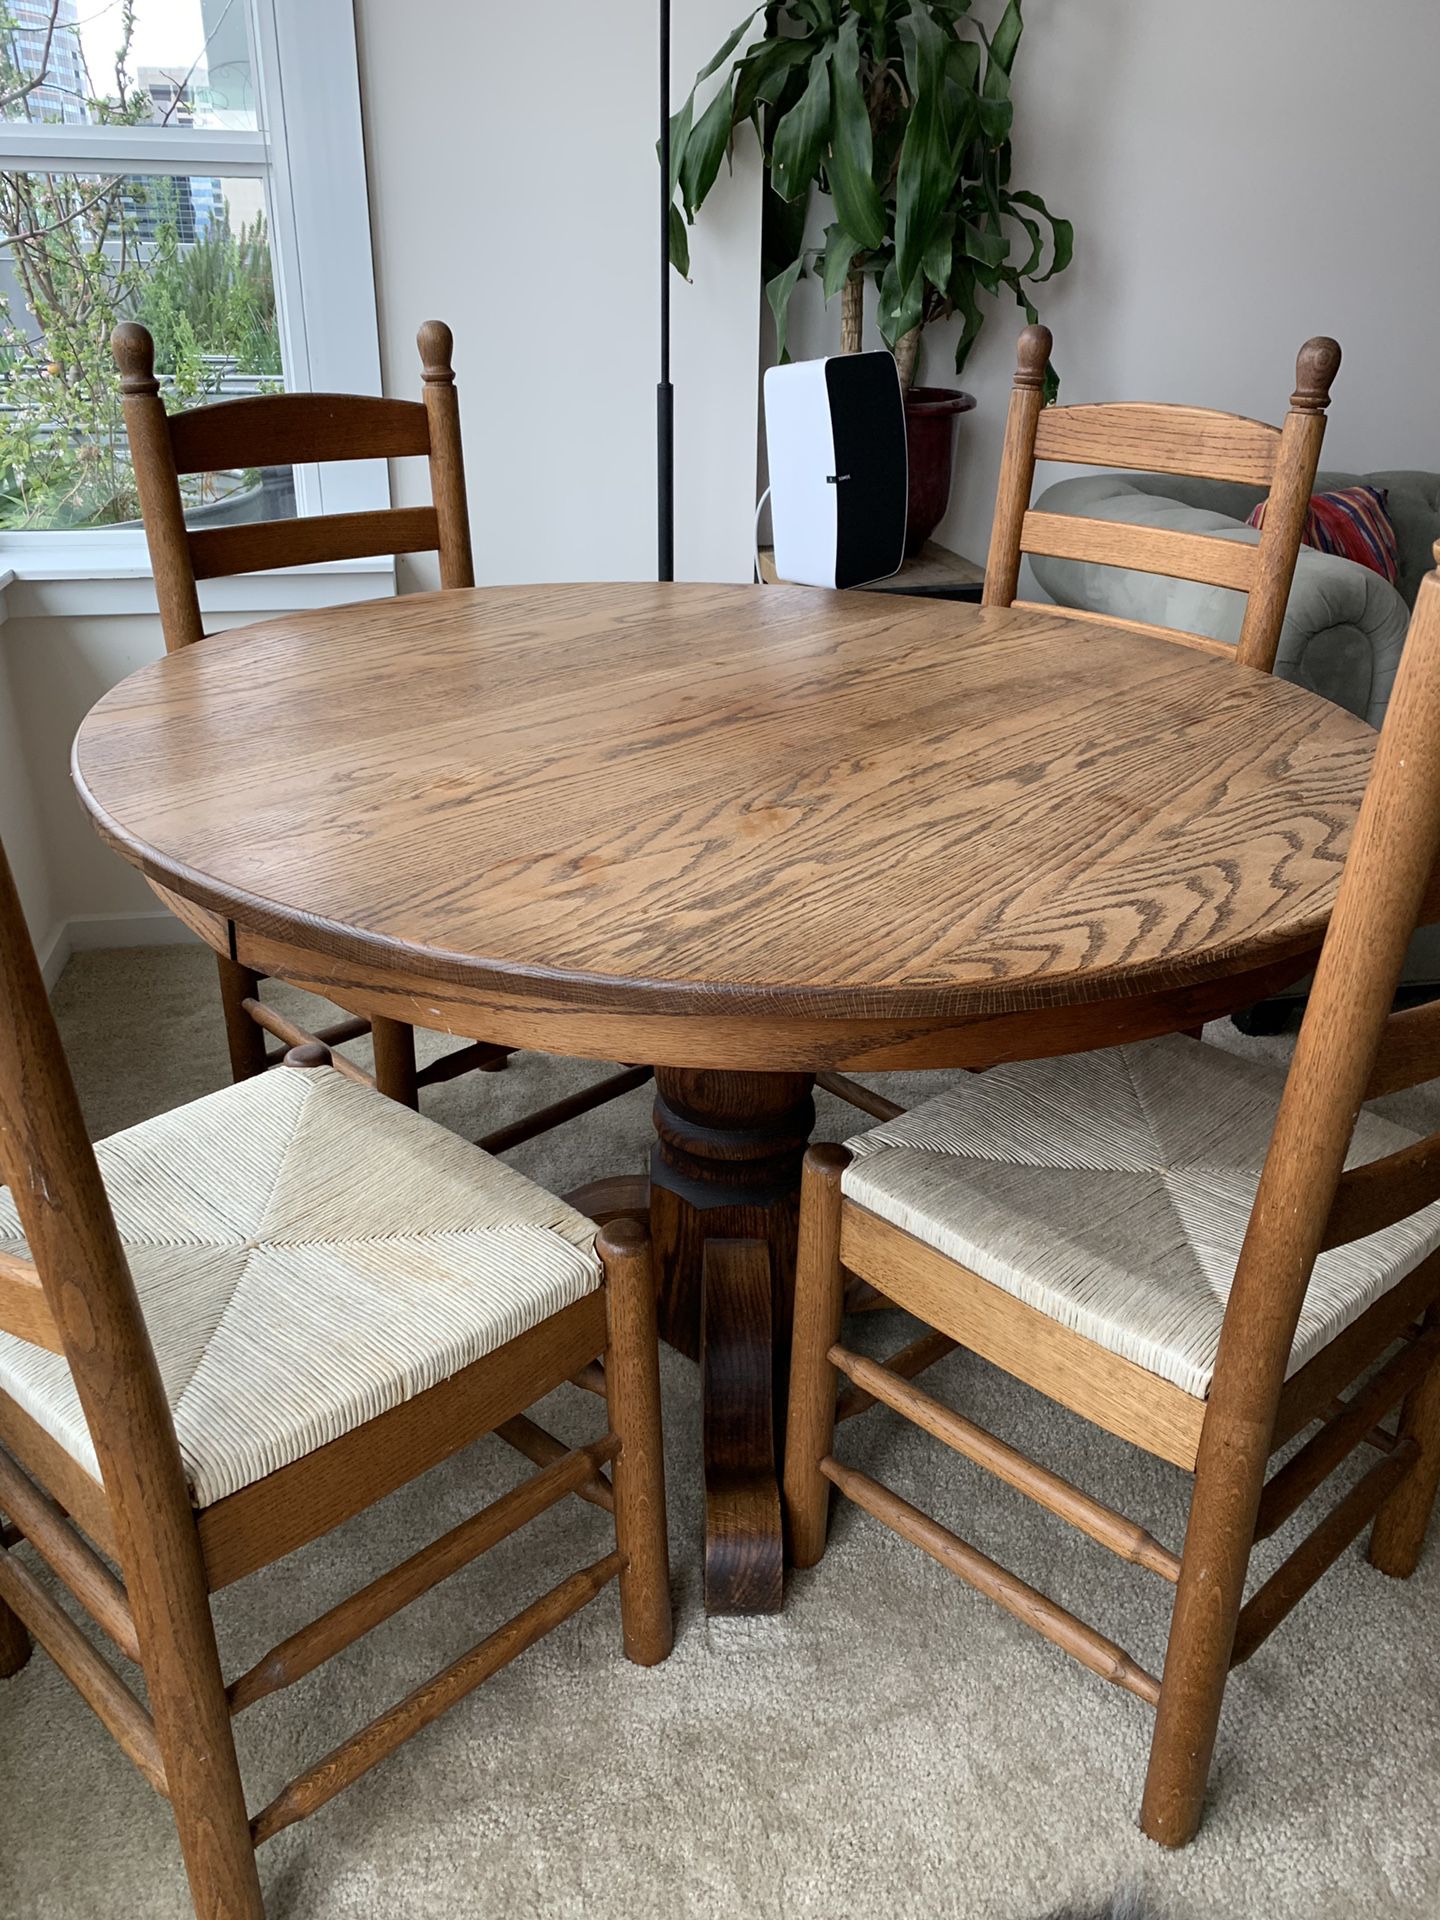 Solid Hardwood Dining Room Table and 4 Chairs 48” wide 29” Tall